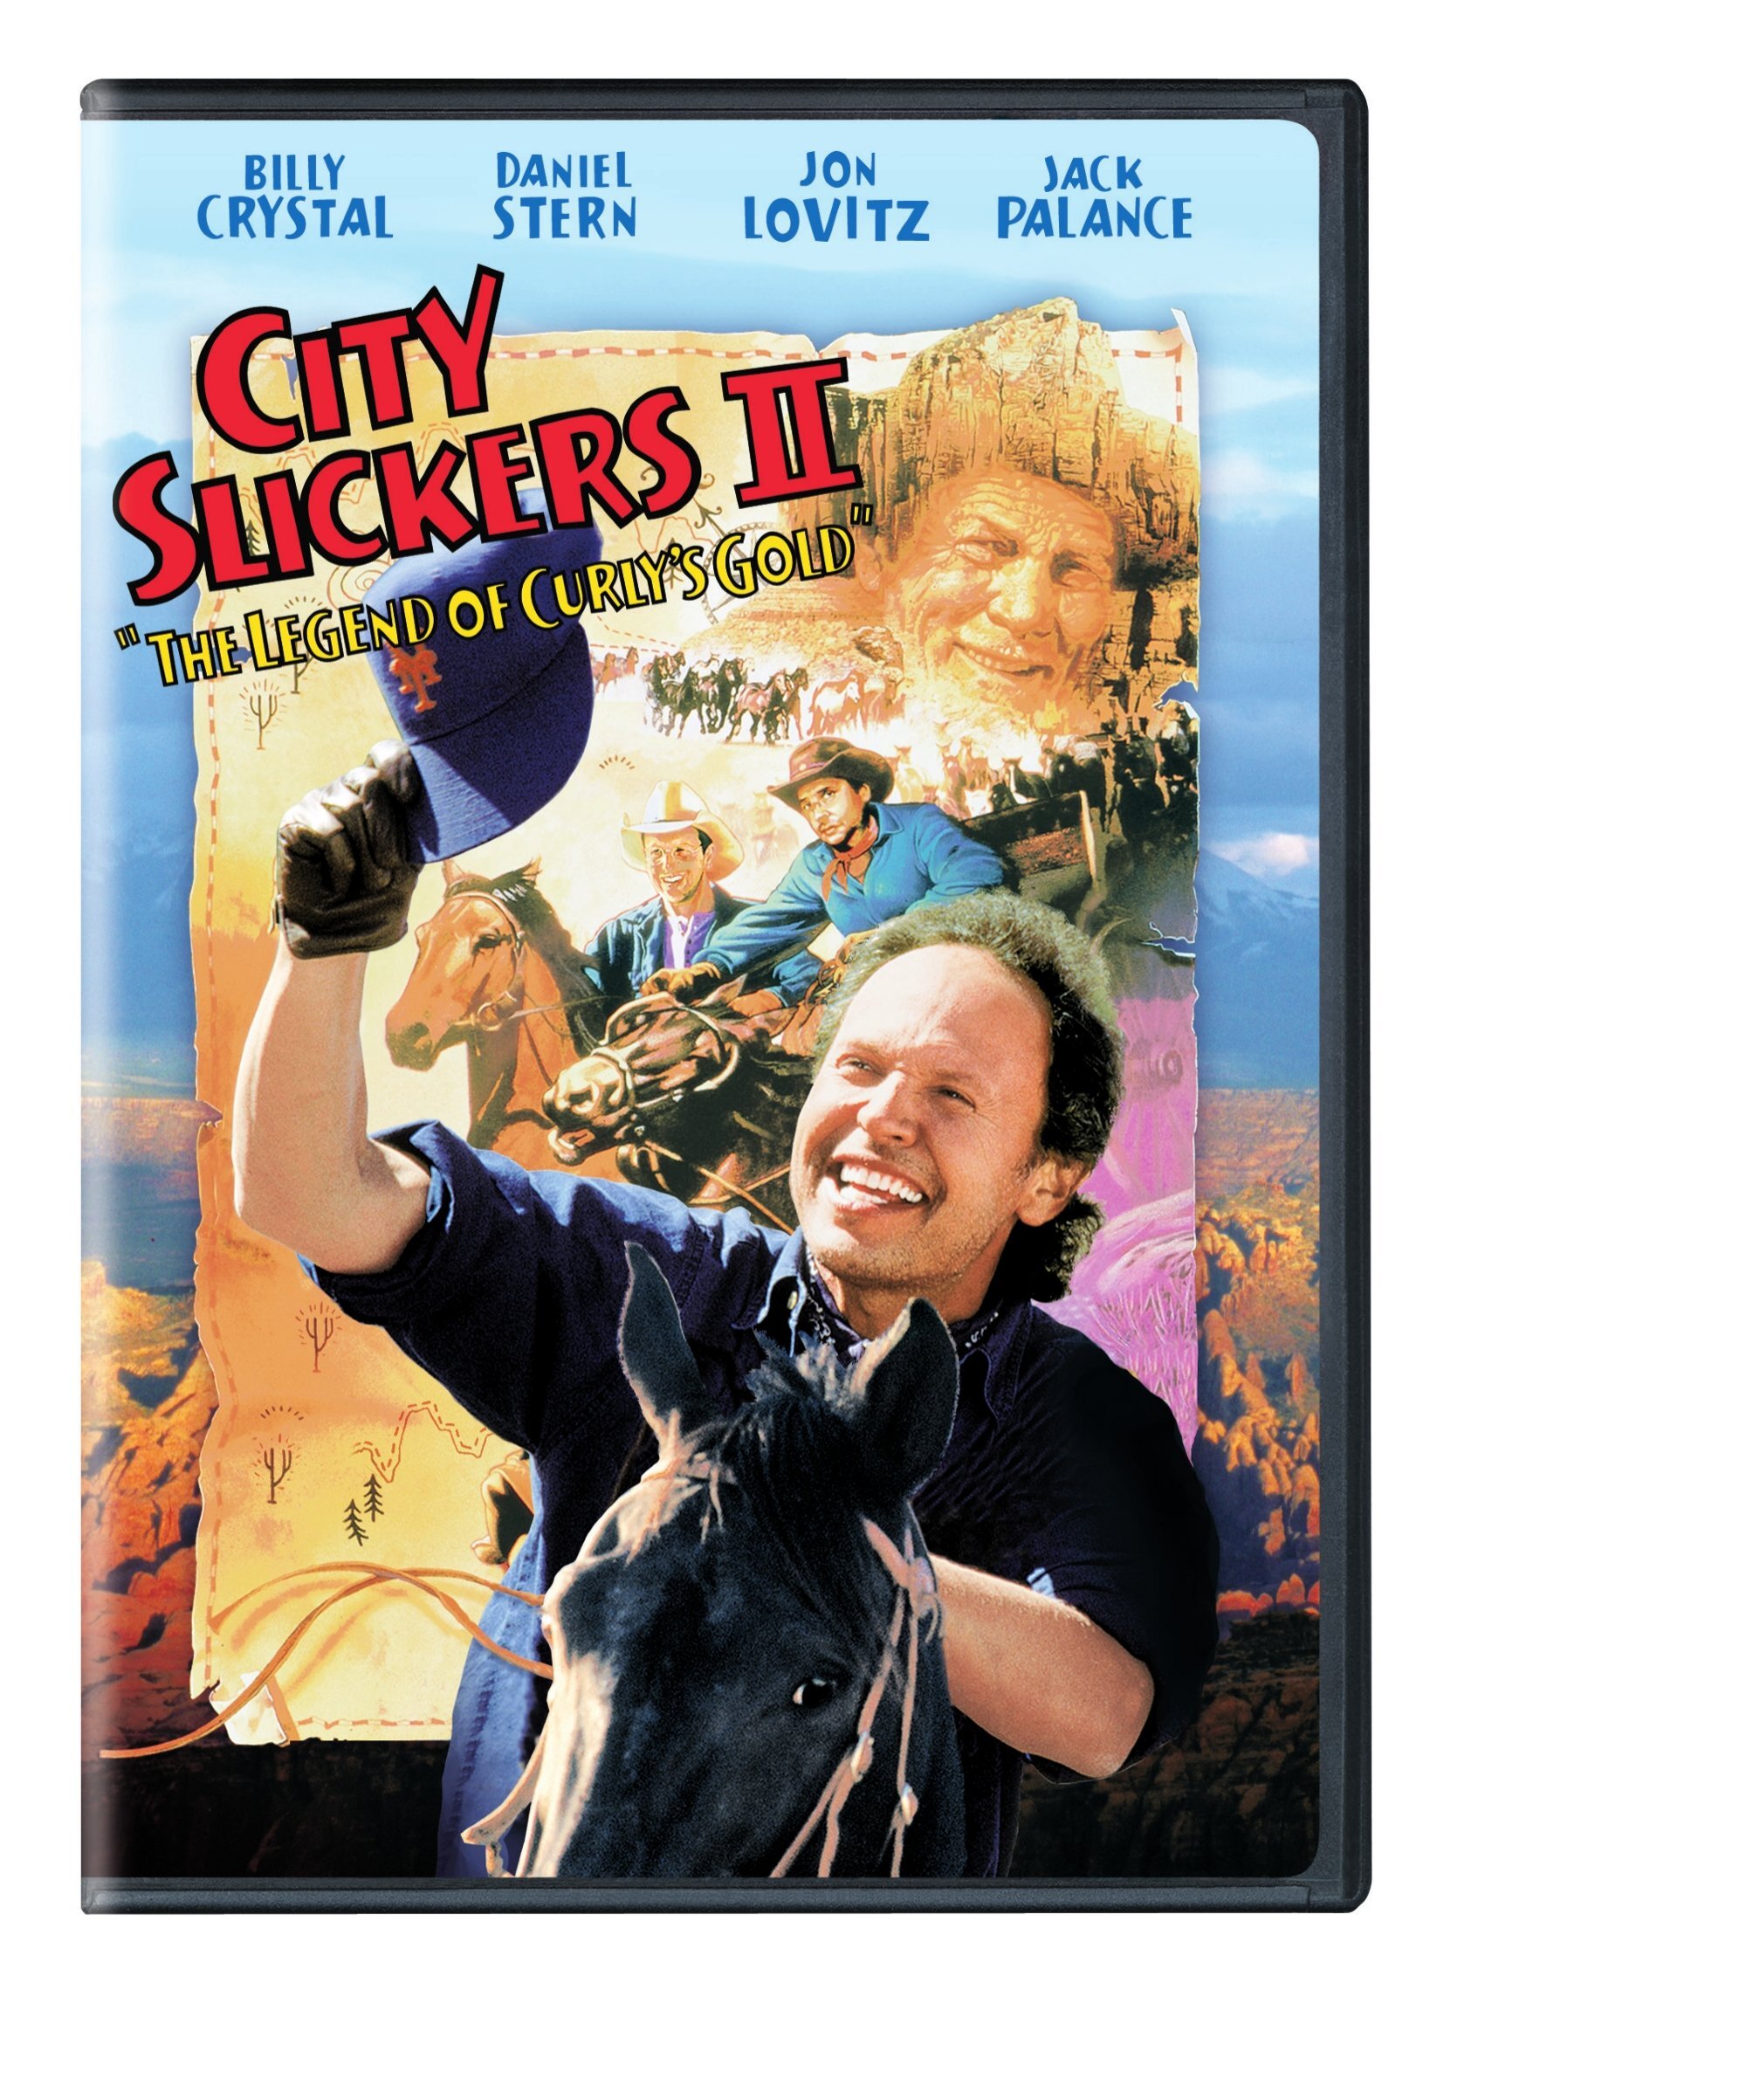 City Slickers 2 - The Legend Of Curly's Gold - DVD [ 1994 ]  - Comedy Movies On DVD - Movies On GRUV